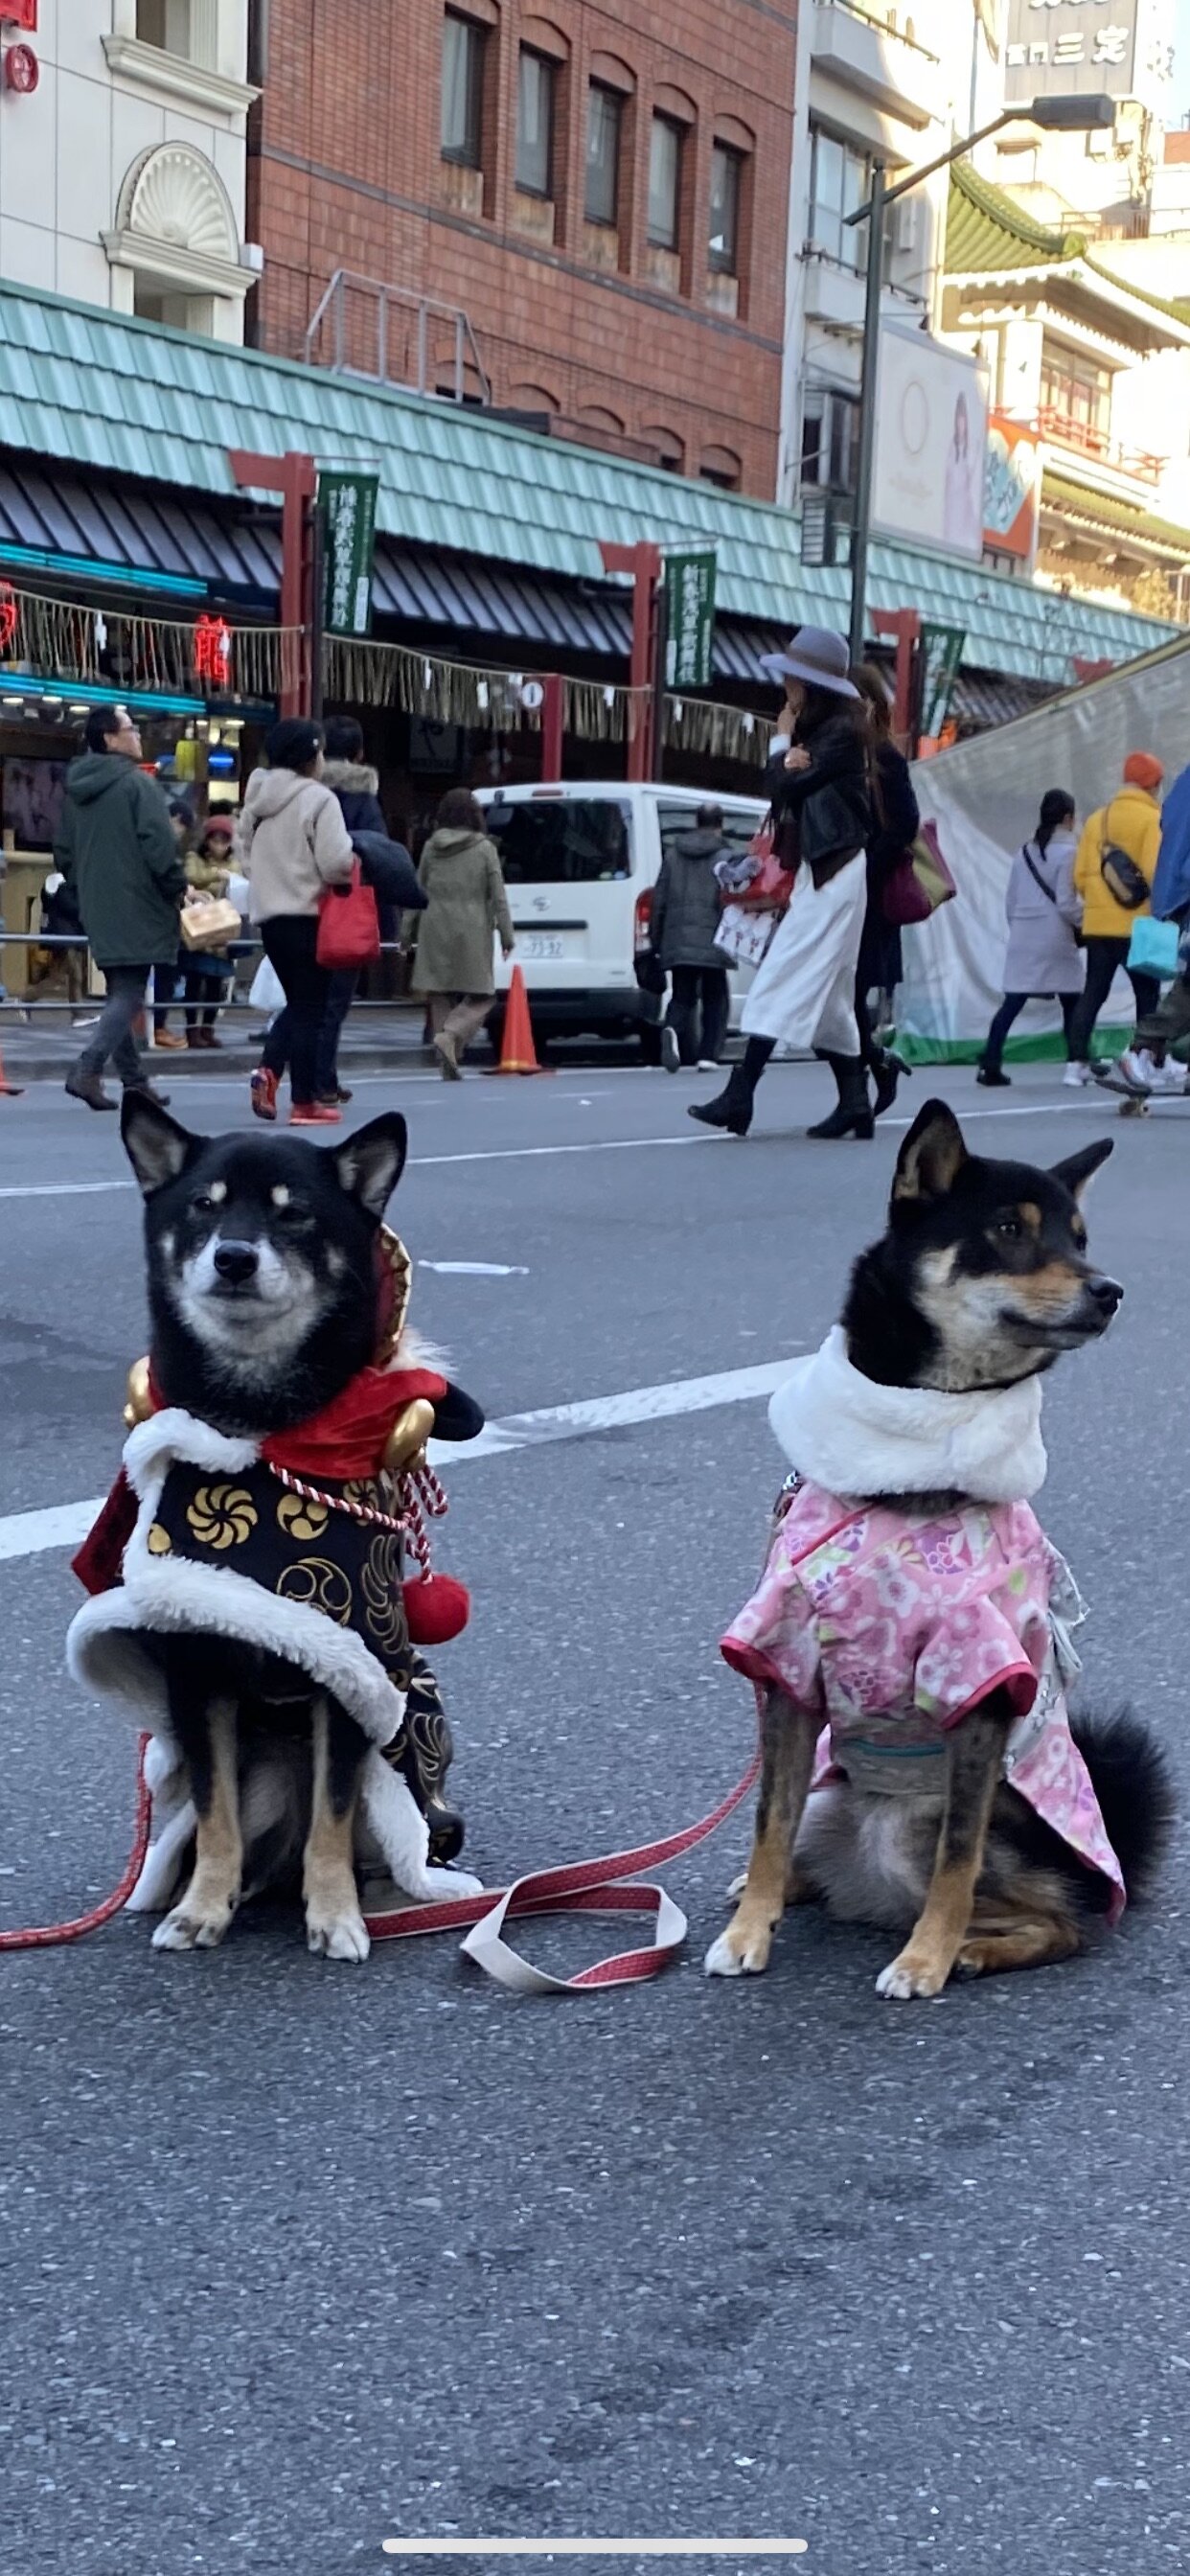 Shiba Inu in costumes on New Years!